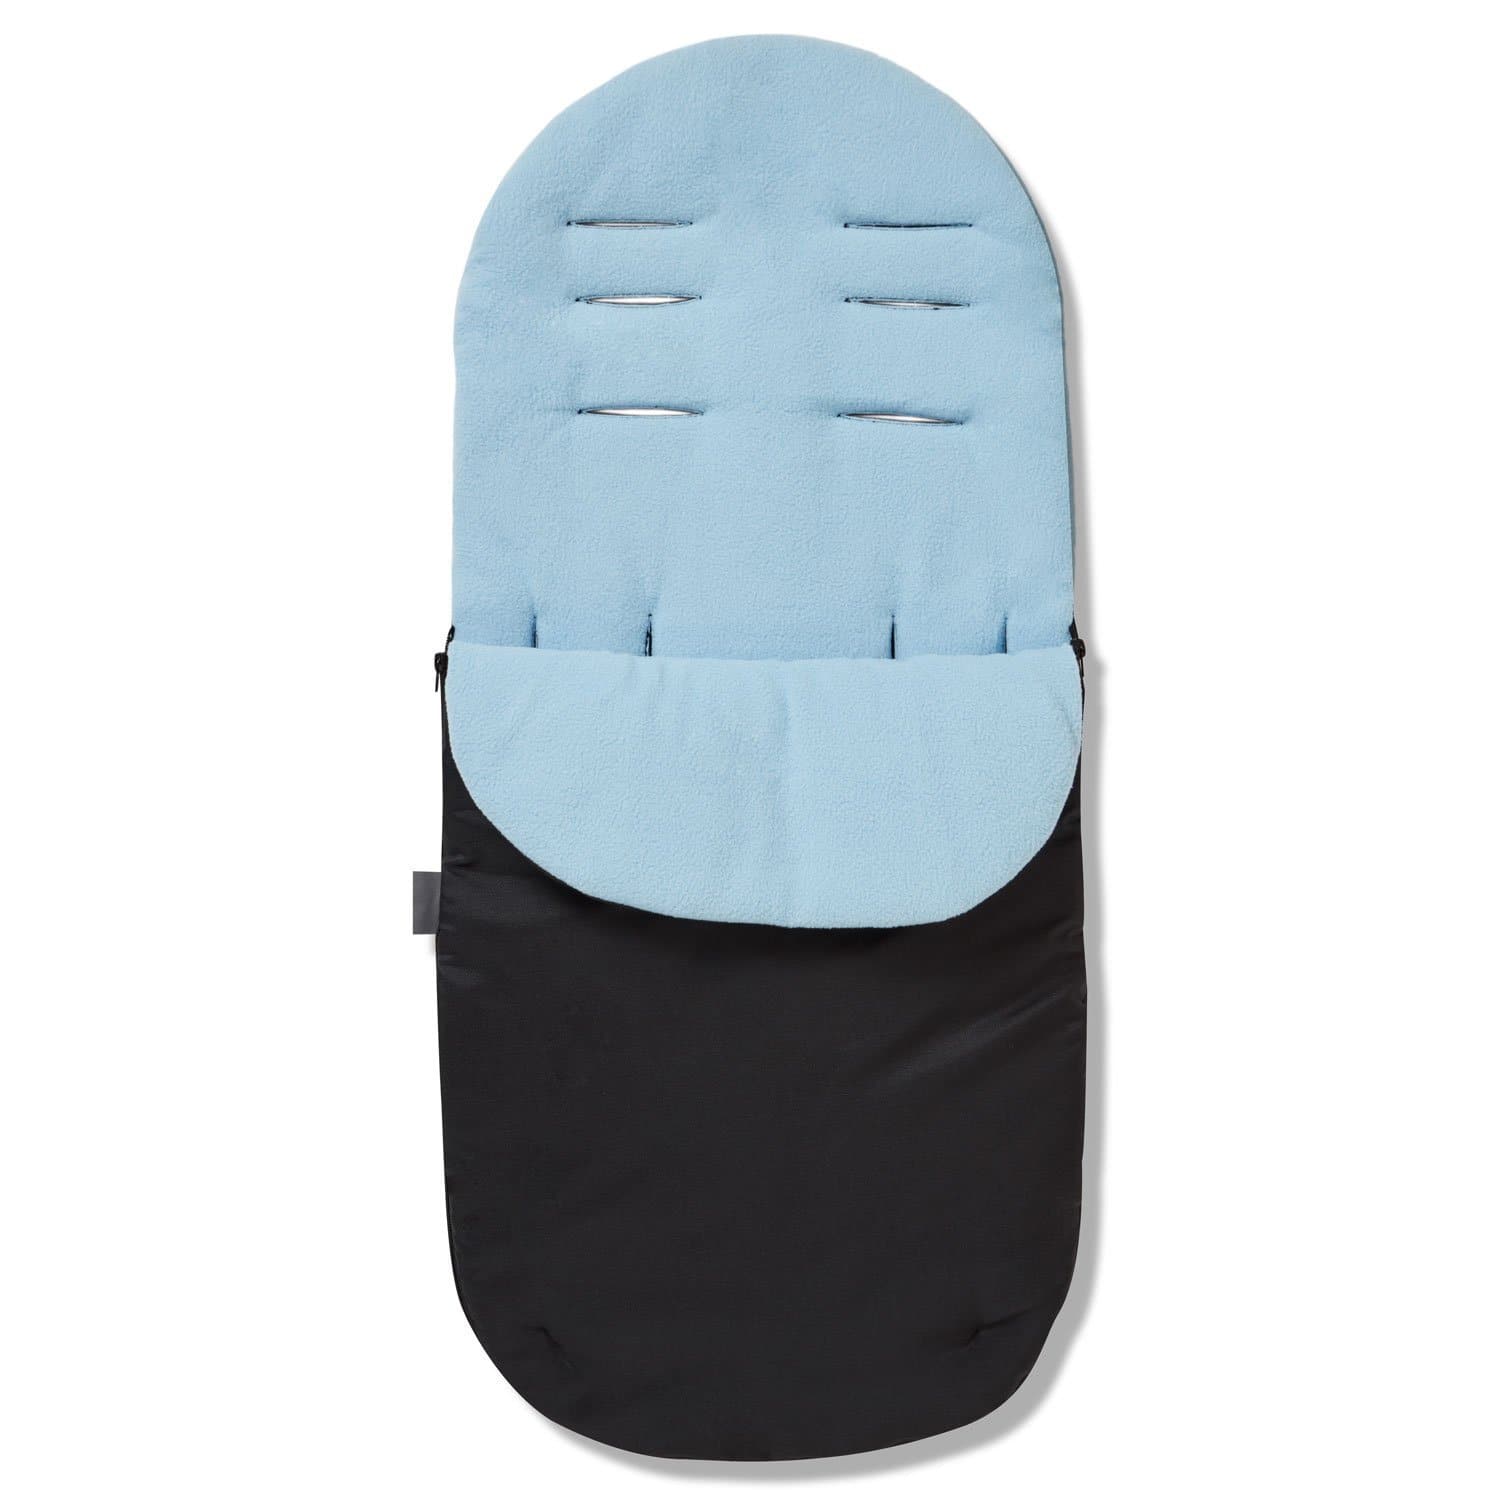 Footmuff / Cosy Toes Compatible with Egg - Light Blue / Fits All Models | For Your Little One